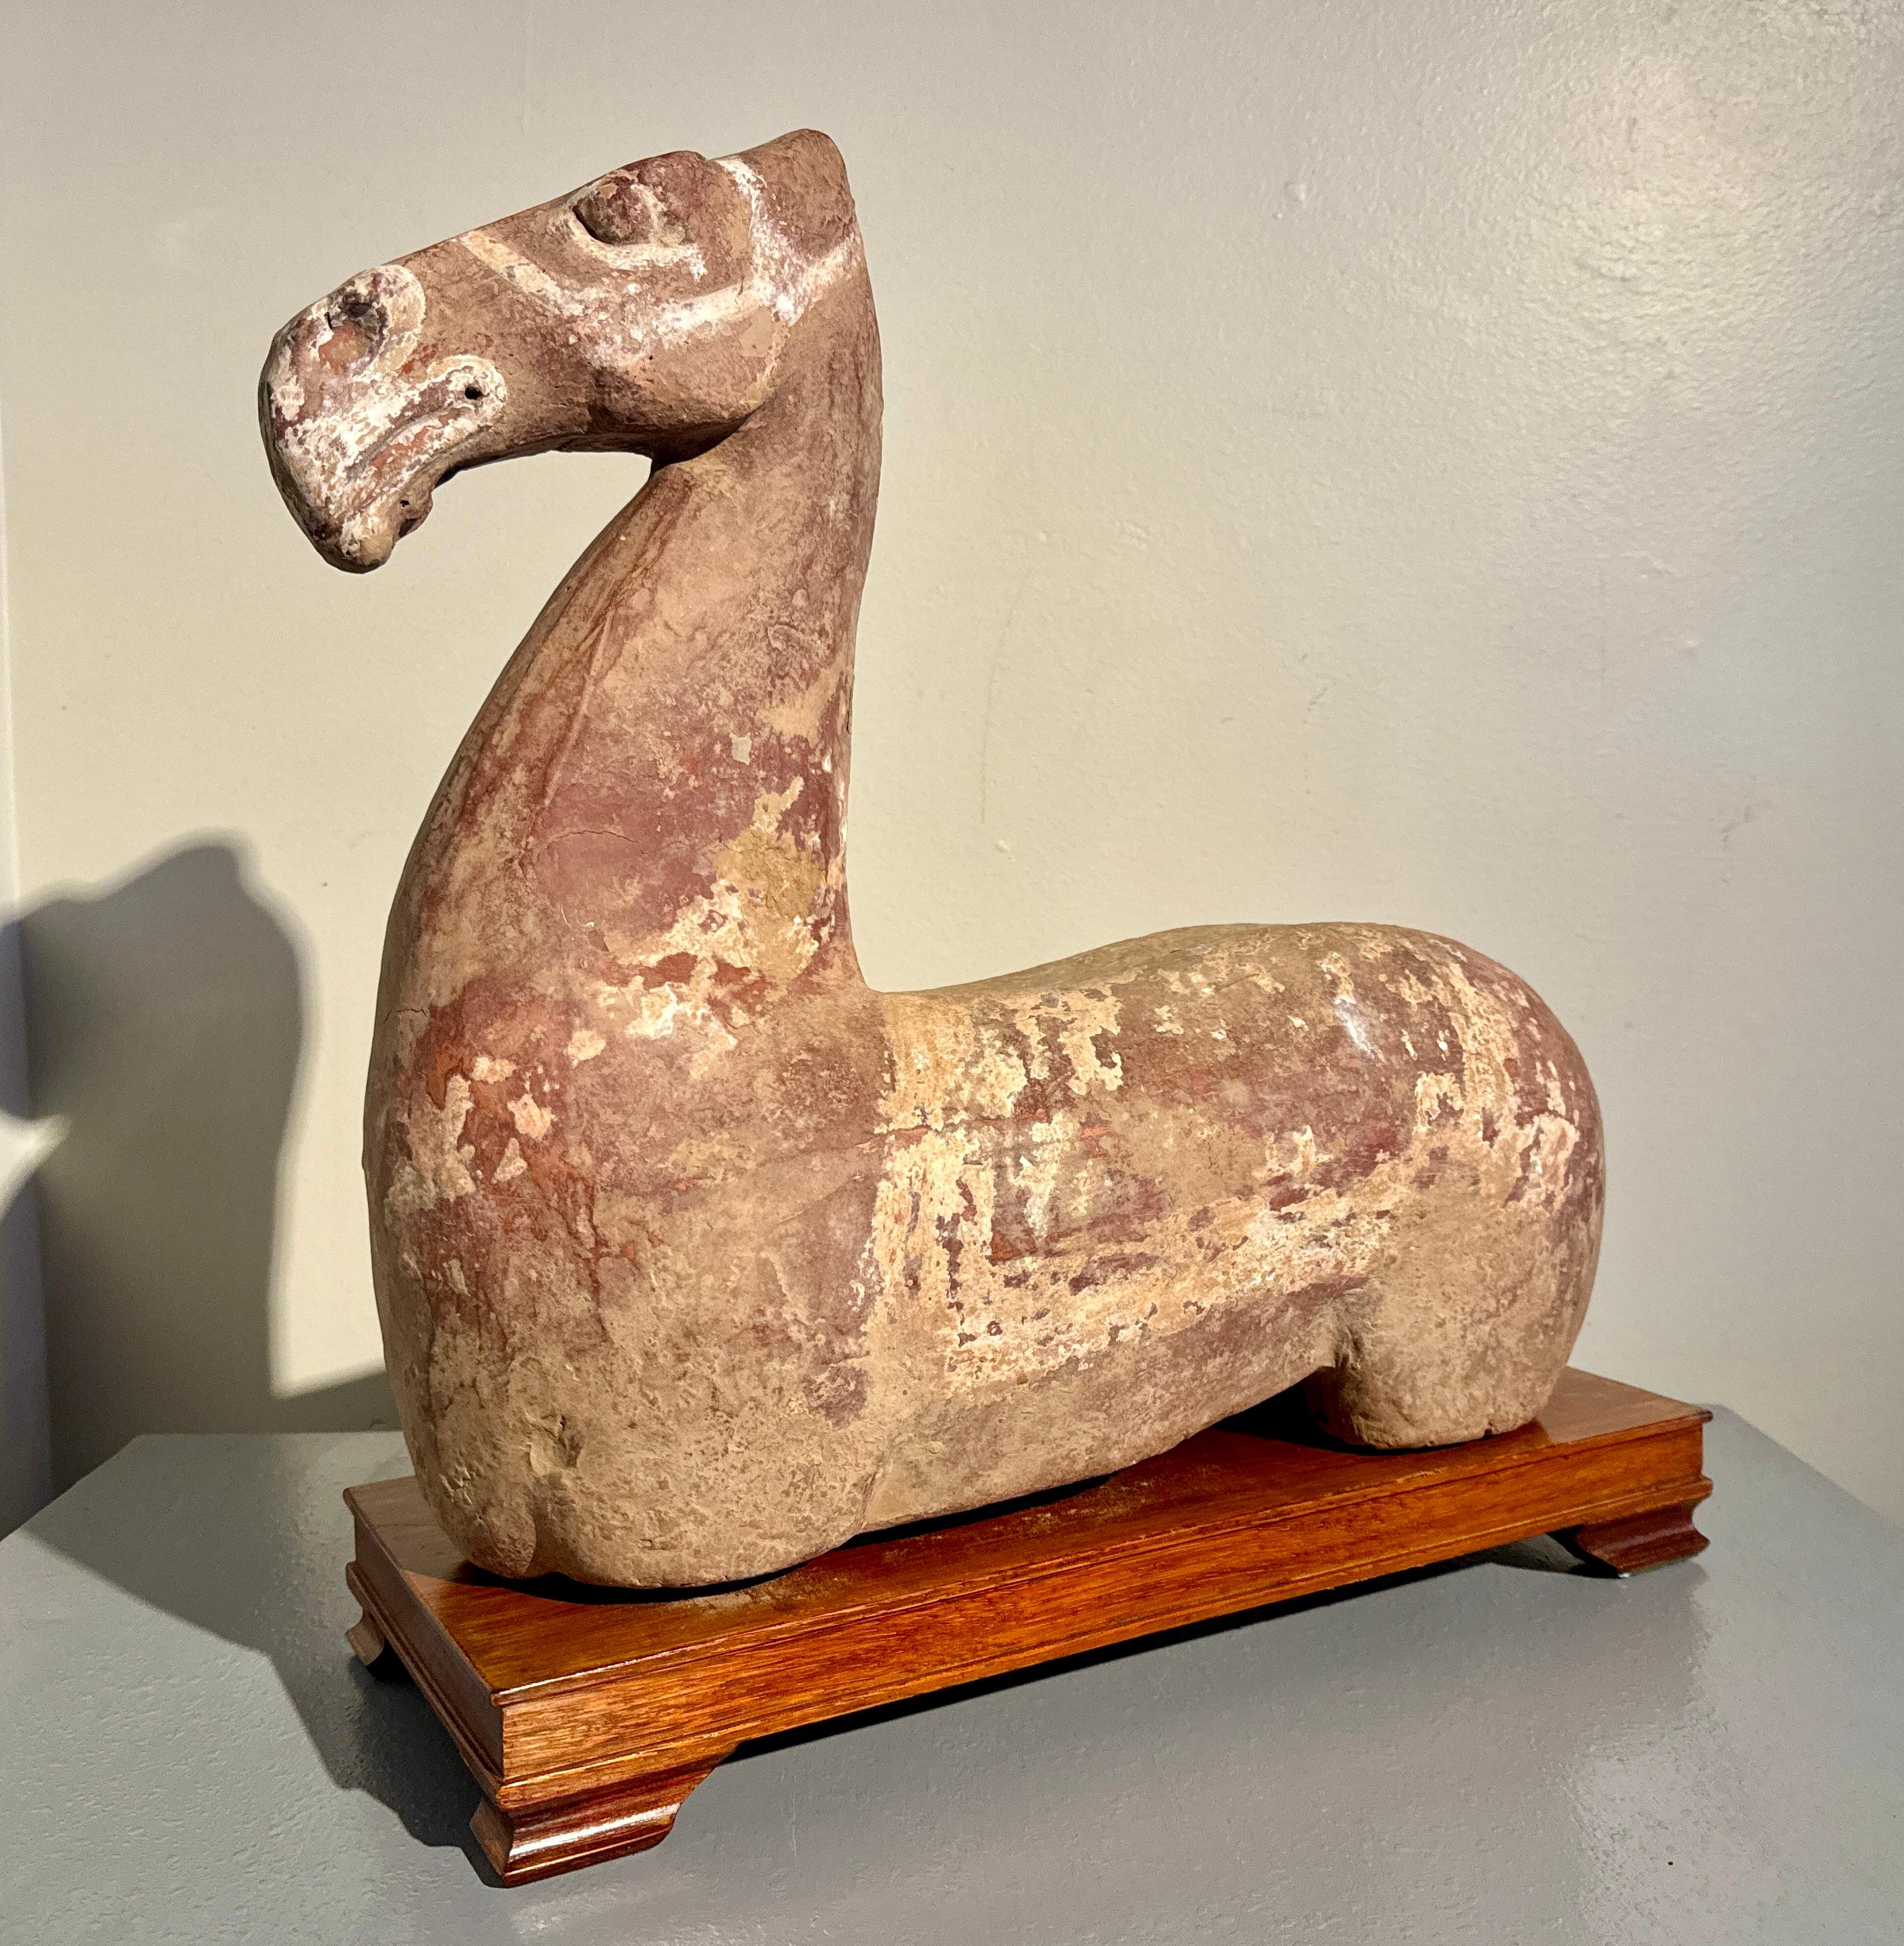 A large Chinese painted pottery figure of a horse torso, Han Dynasty (206 BC to 220 AD).

An unusually large Chinese Han Dynasty horse torso, also sometimes referred to as a recumbent horse, crafted from fired red pottery, with remnants of a slip